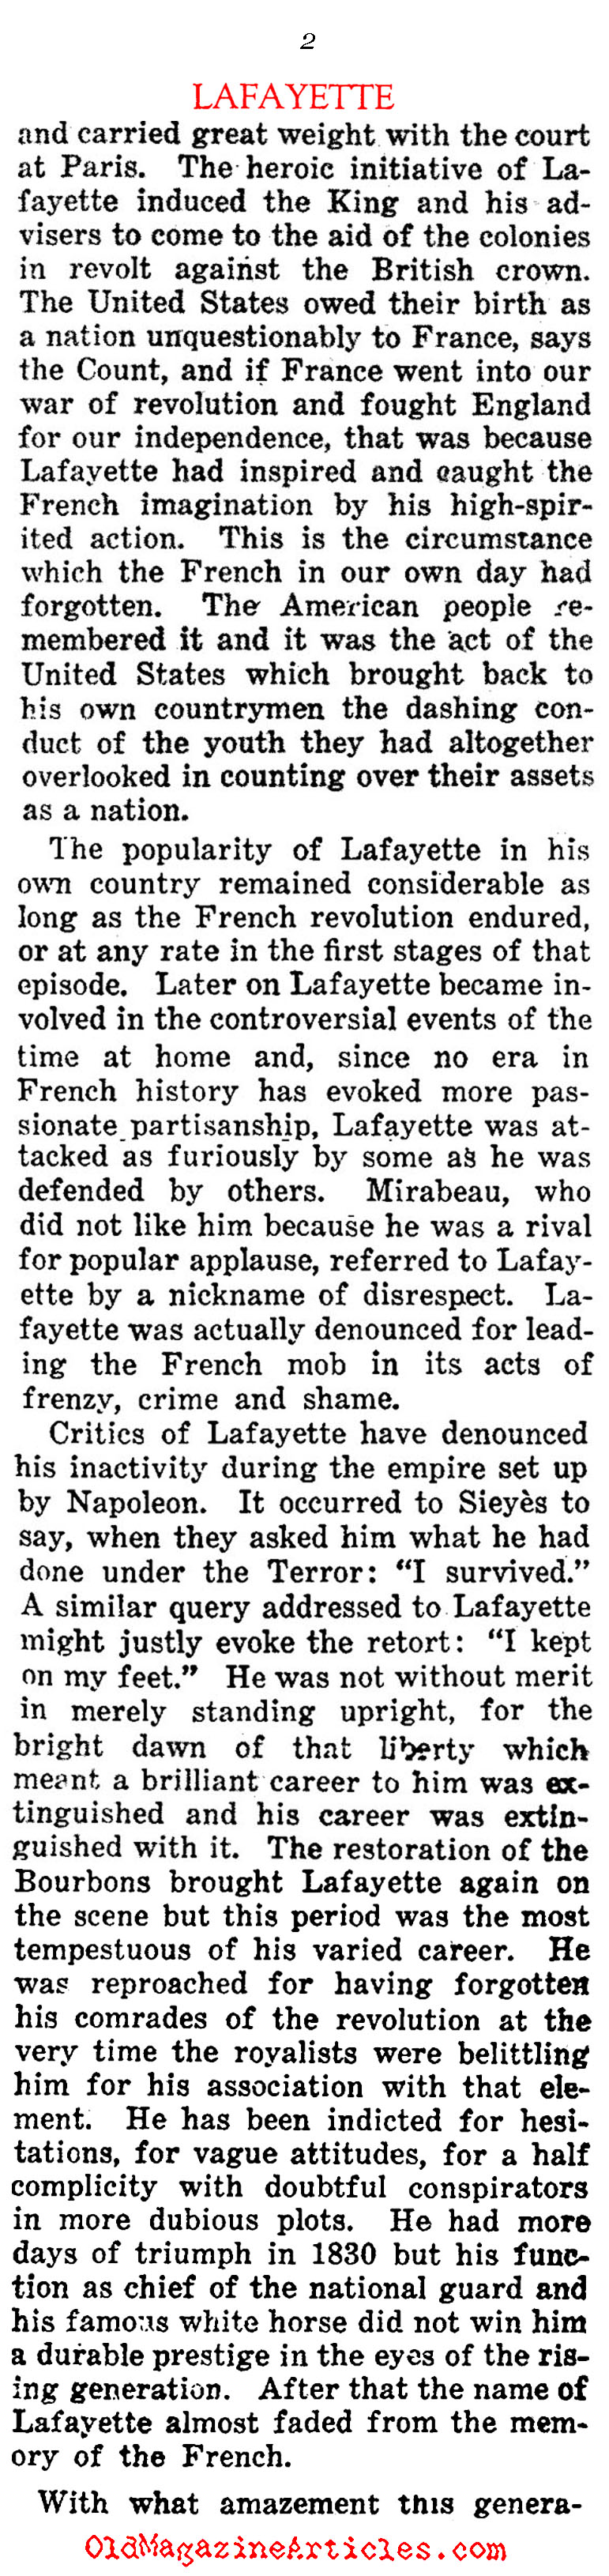 French Amazement at American Esteem of Lafayette (Current Opinion Magazine, 1922)